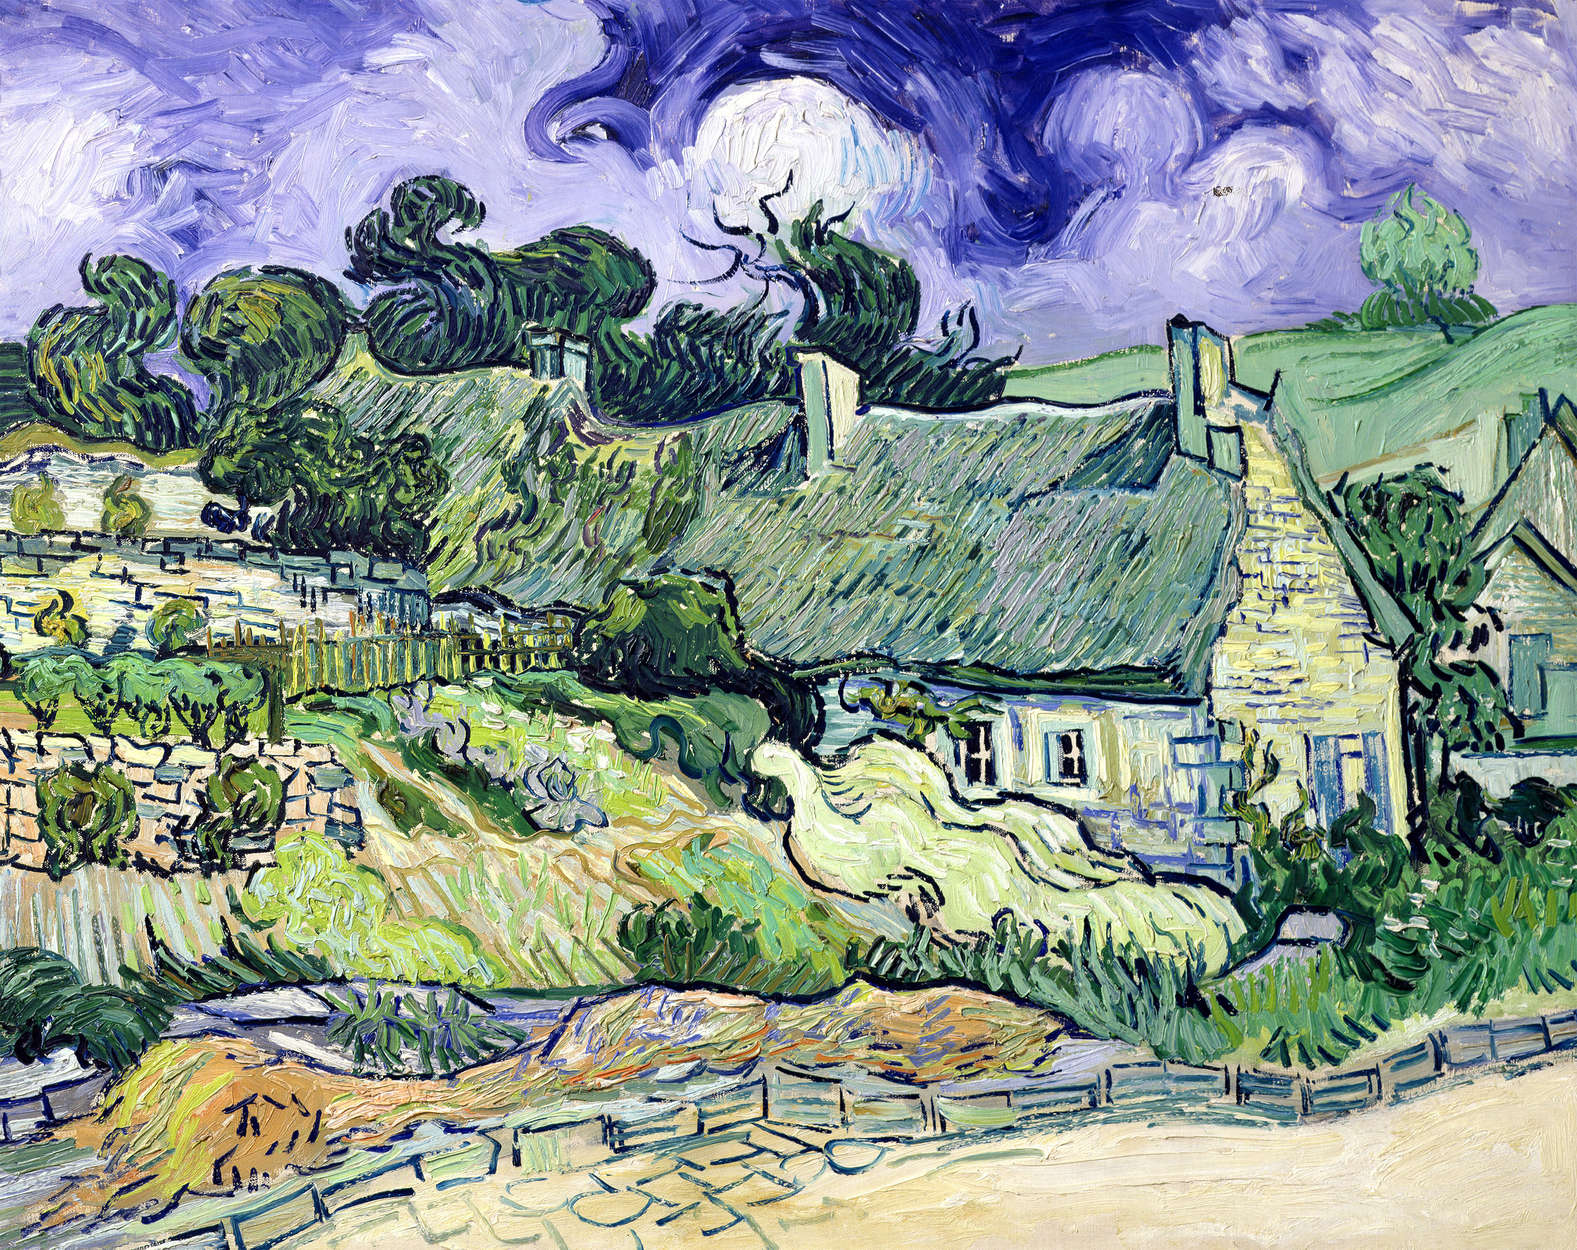             Photo wallpaper "Thatched roof houses in Cordeville" by Vincent van Gogh
        